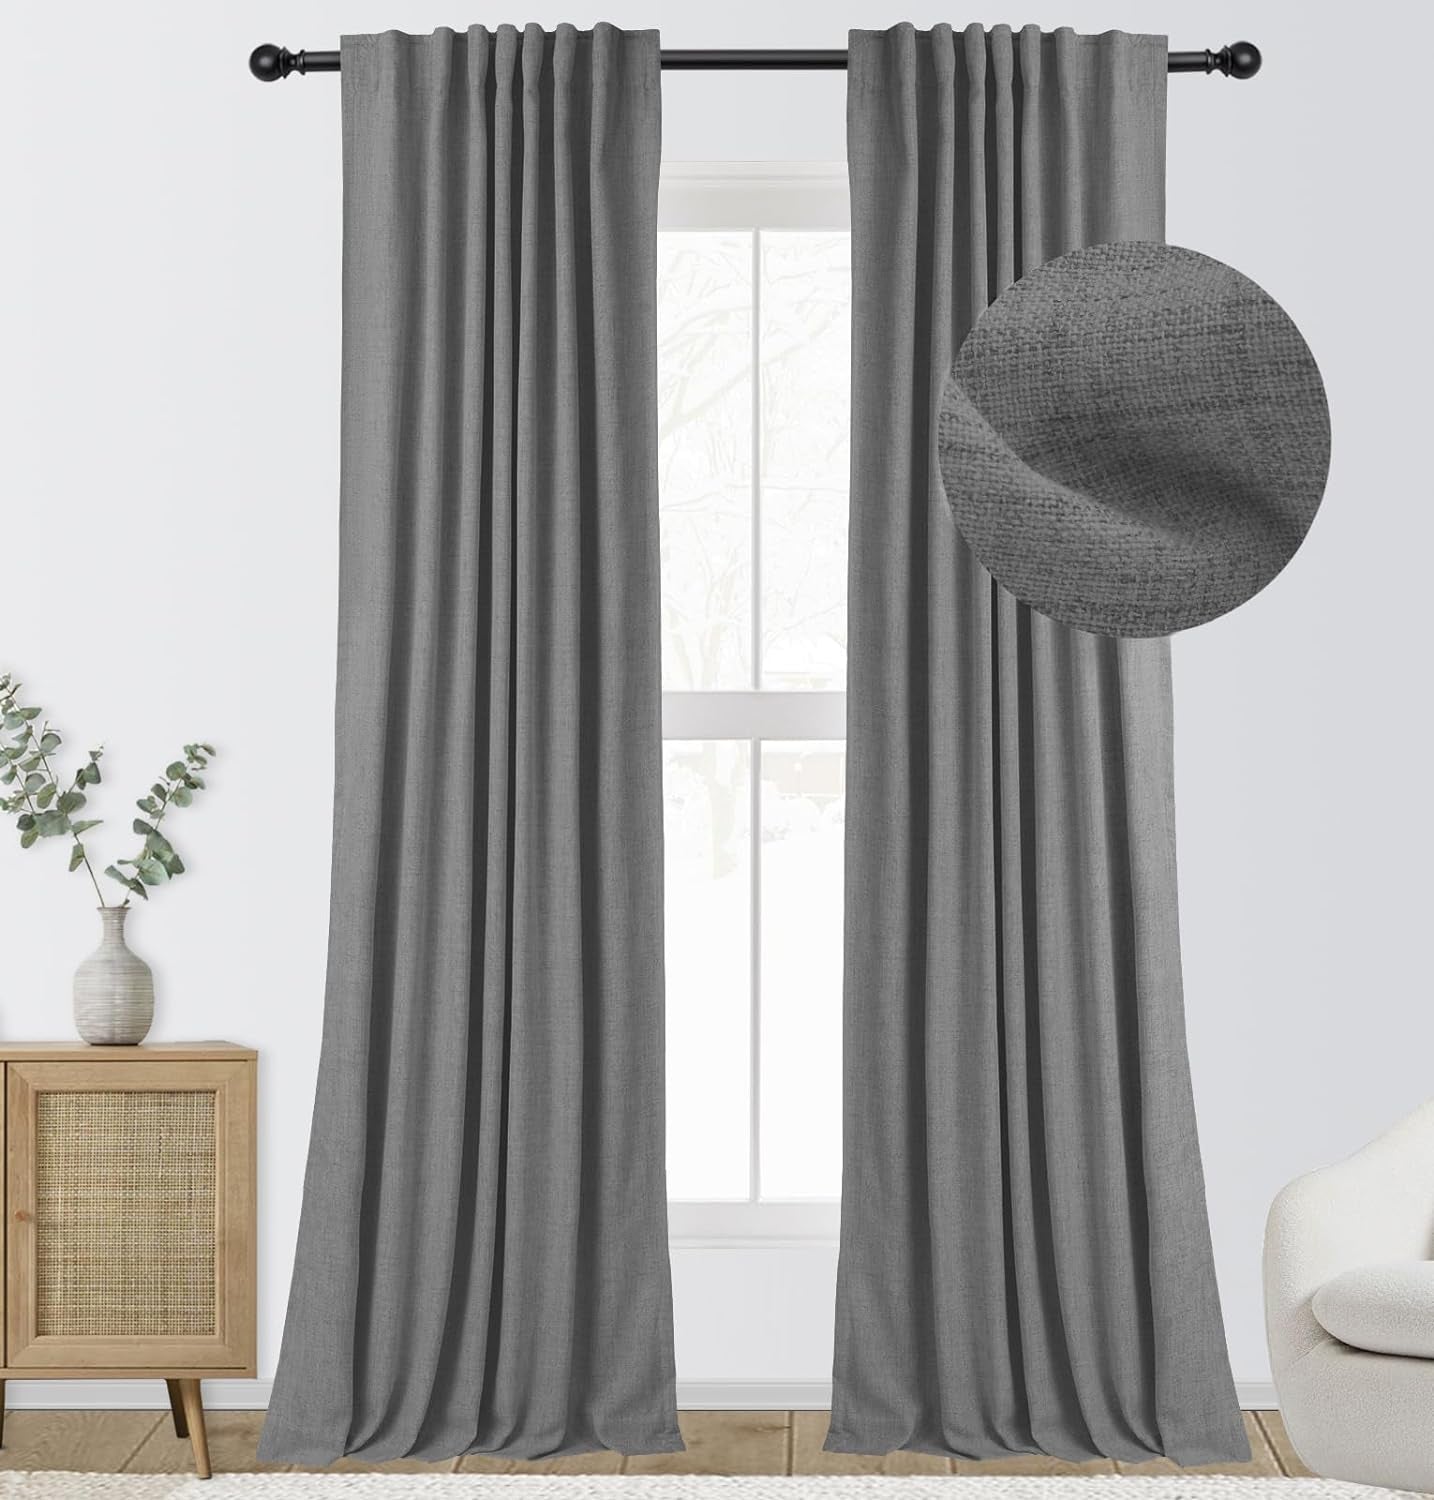 INOVADAY 100% Blackout Curtains 96 Inches Long 2 Panels Set, Thermal Insulated Linen Blackout Curtains for Bedroom, Back Tab/Rod Pocket Curtains & Drapes for Living Room - Beige, W50 X L96  INOVADAY 10 Dark Grey 50''W X 72''L 